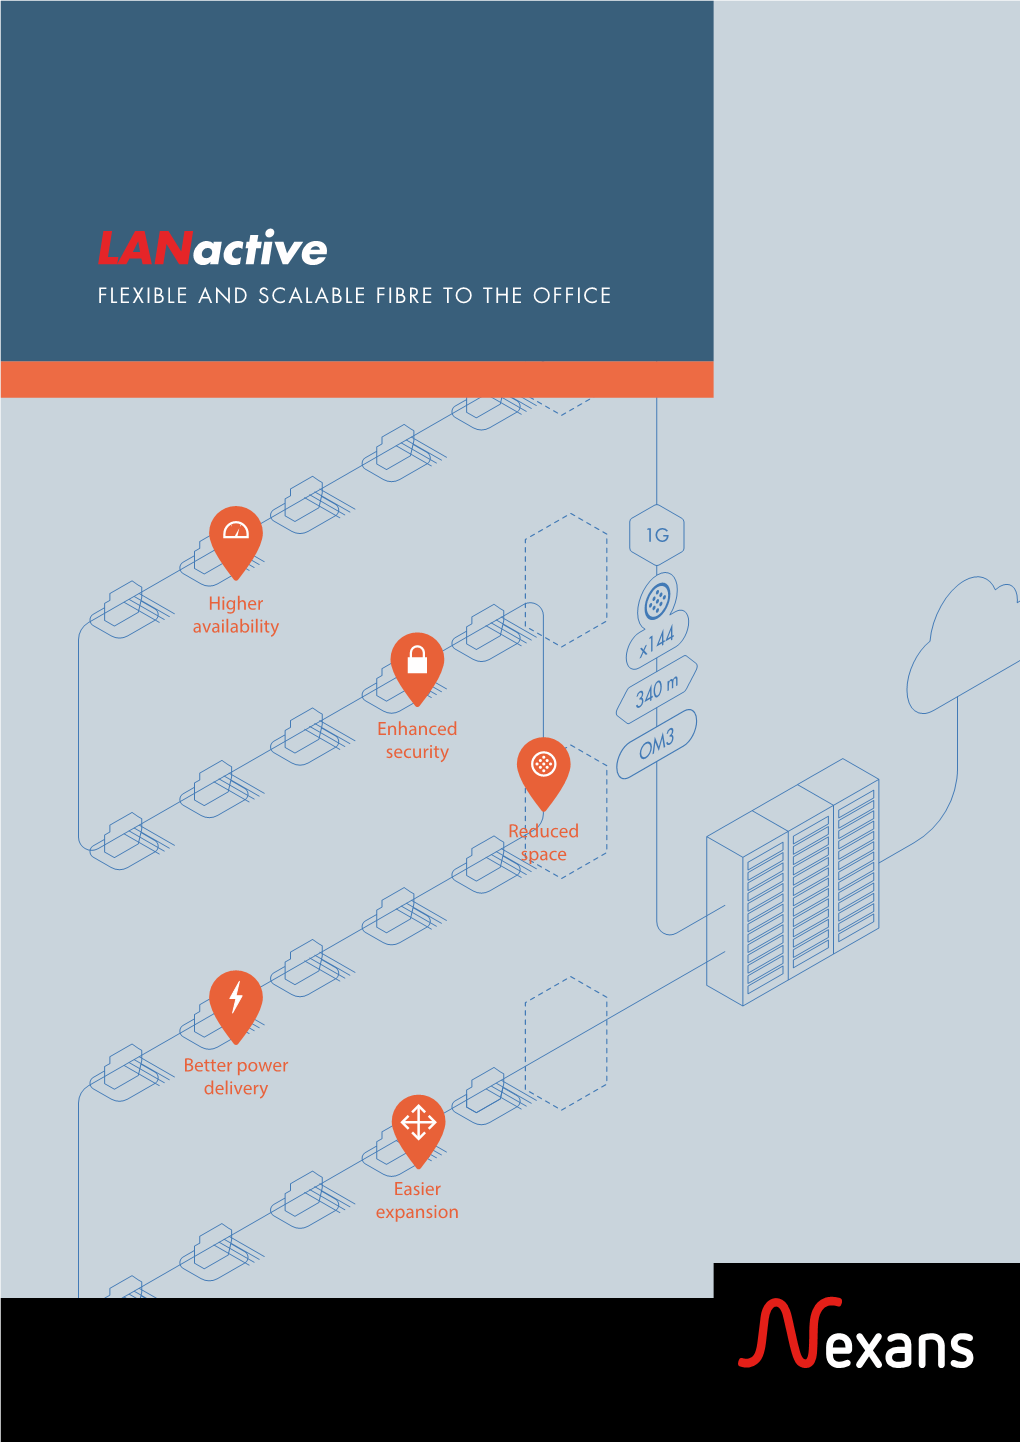 Lanactive Flexibleswitch to and the Futurescalable FIBRE to the OFFICE